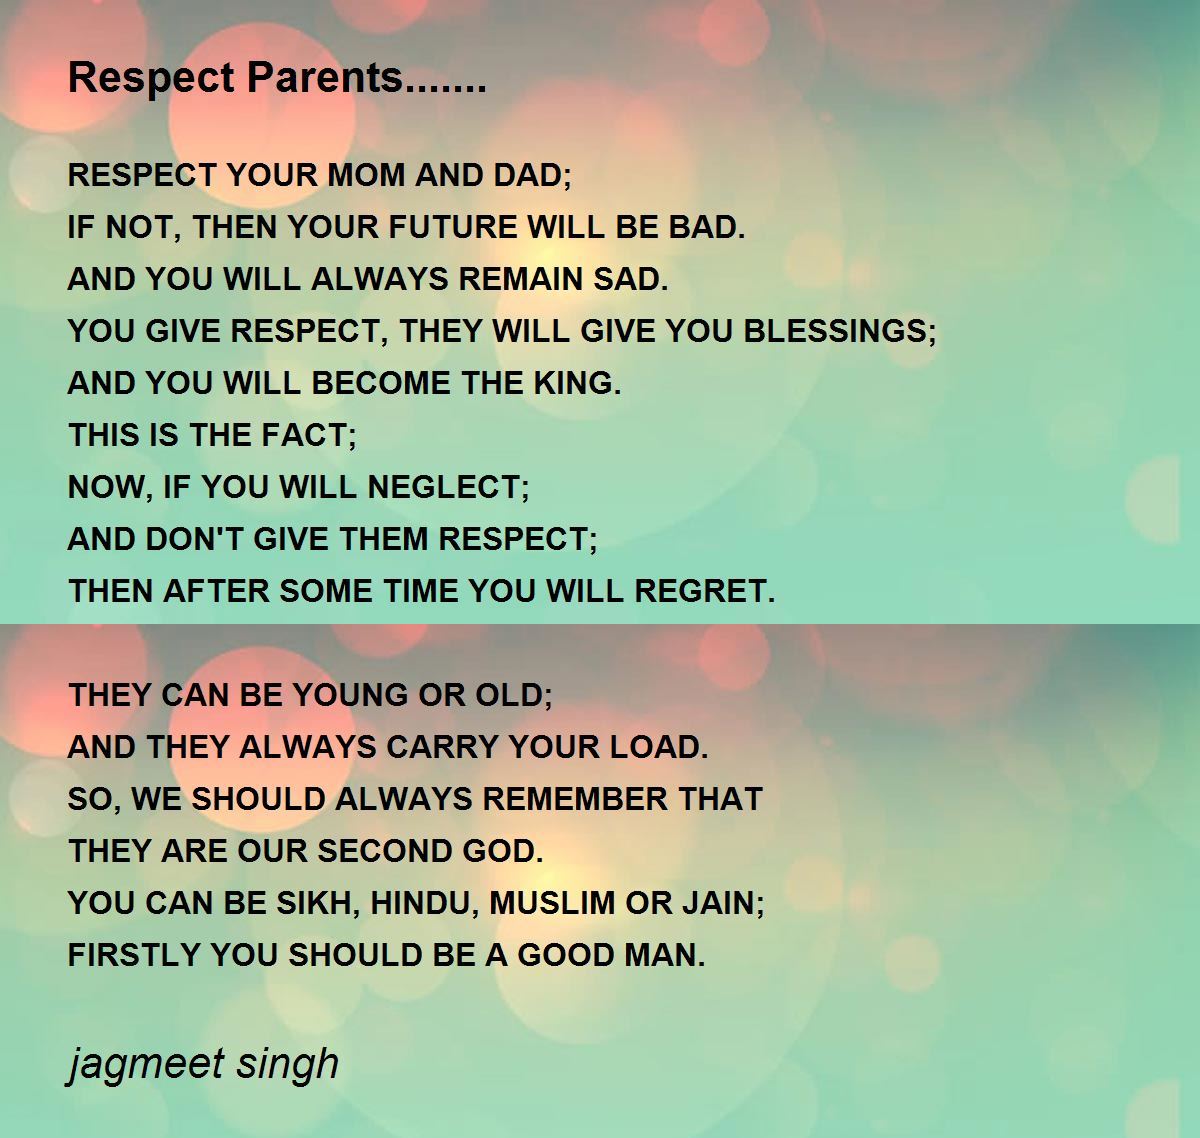 essay on respecting parents